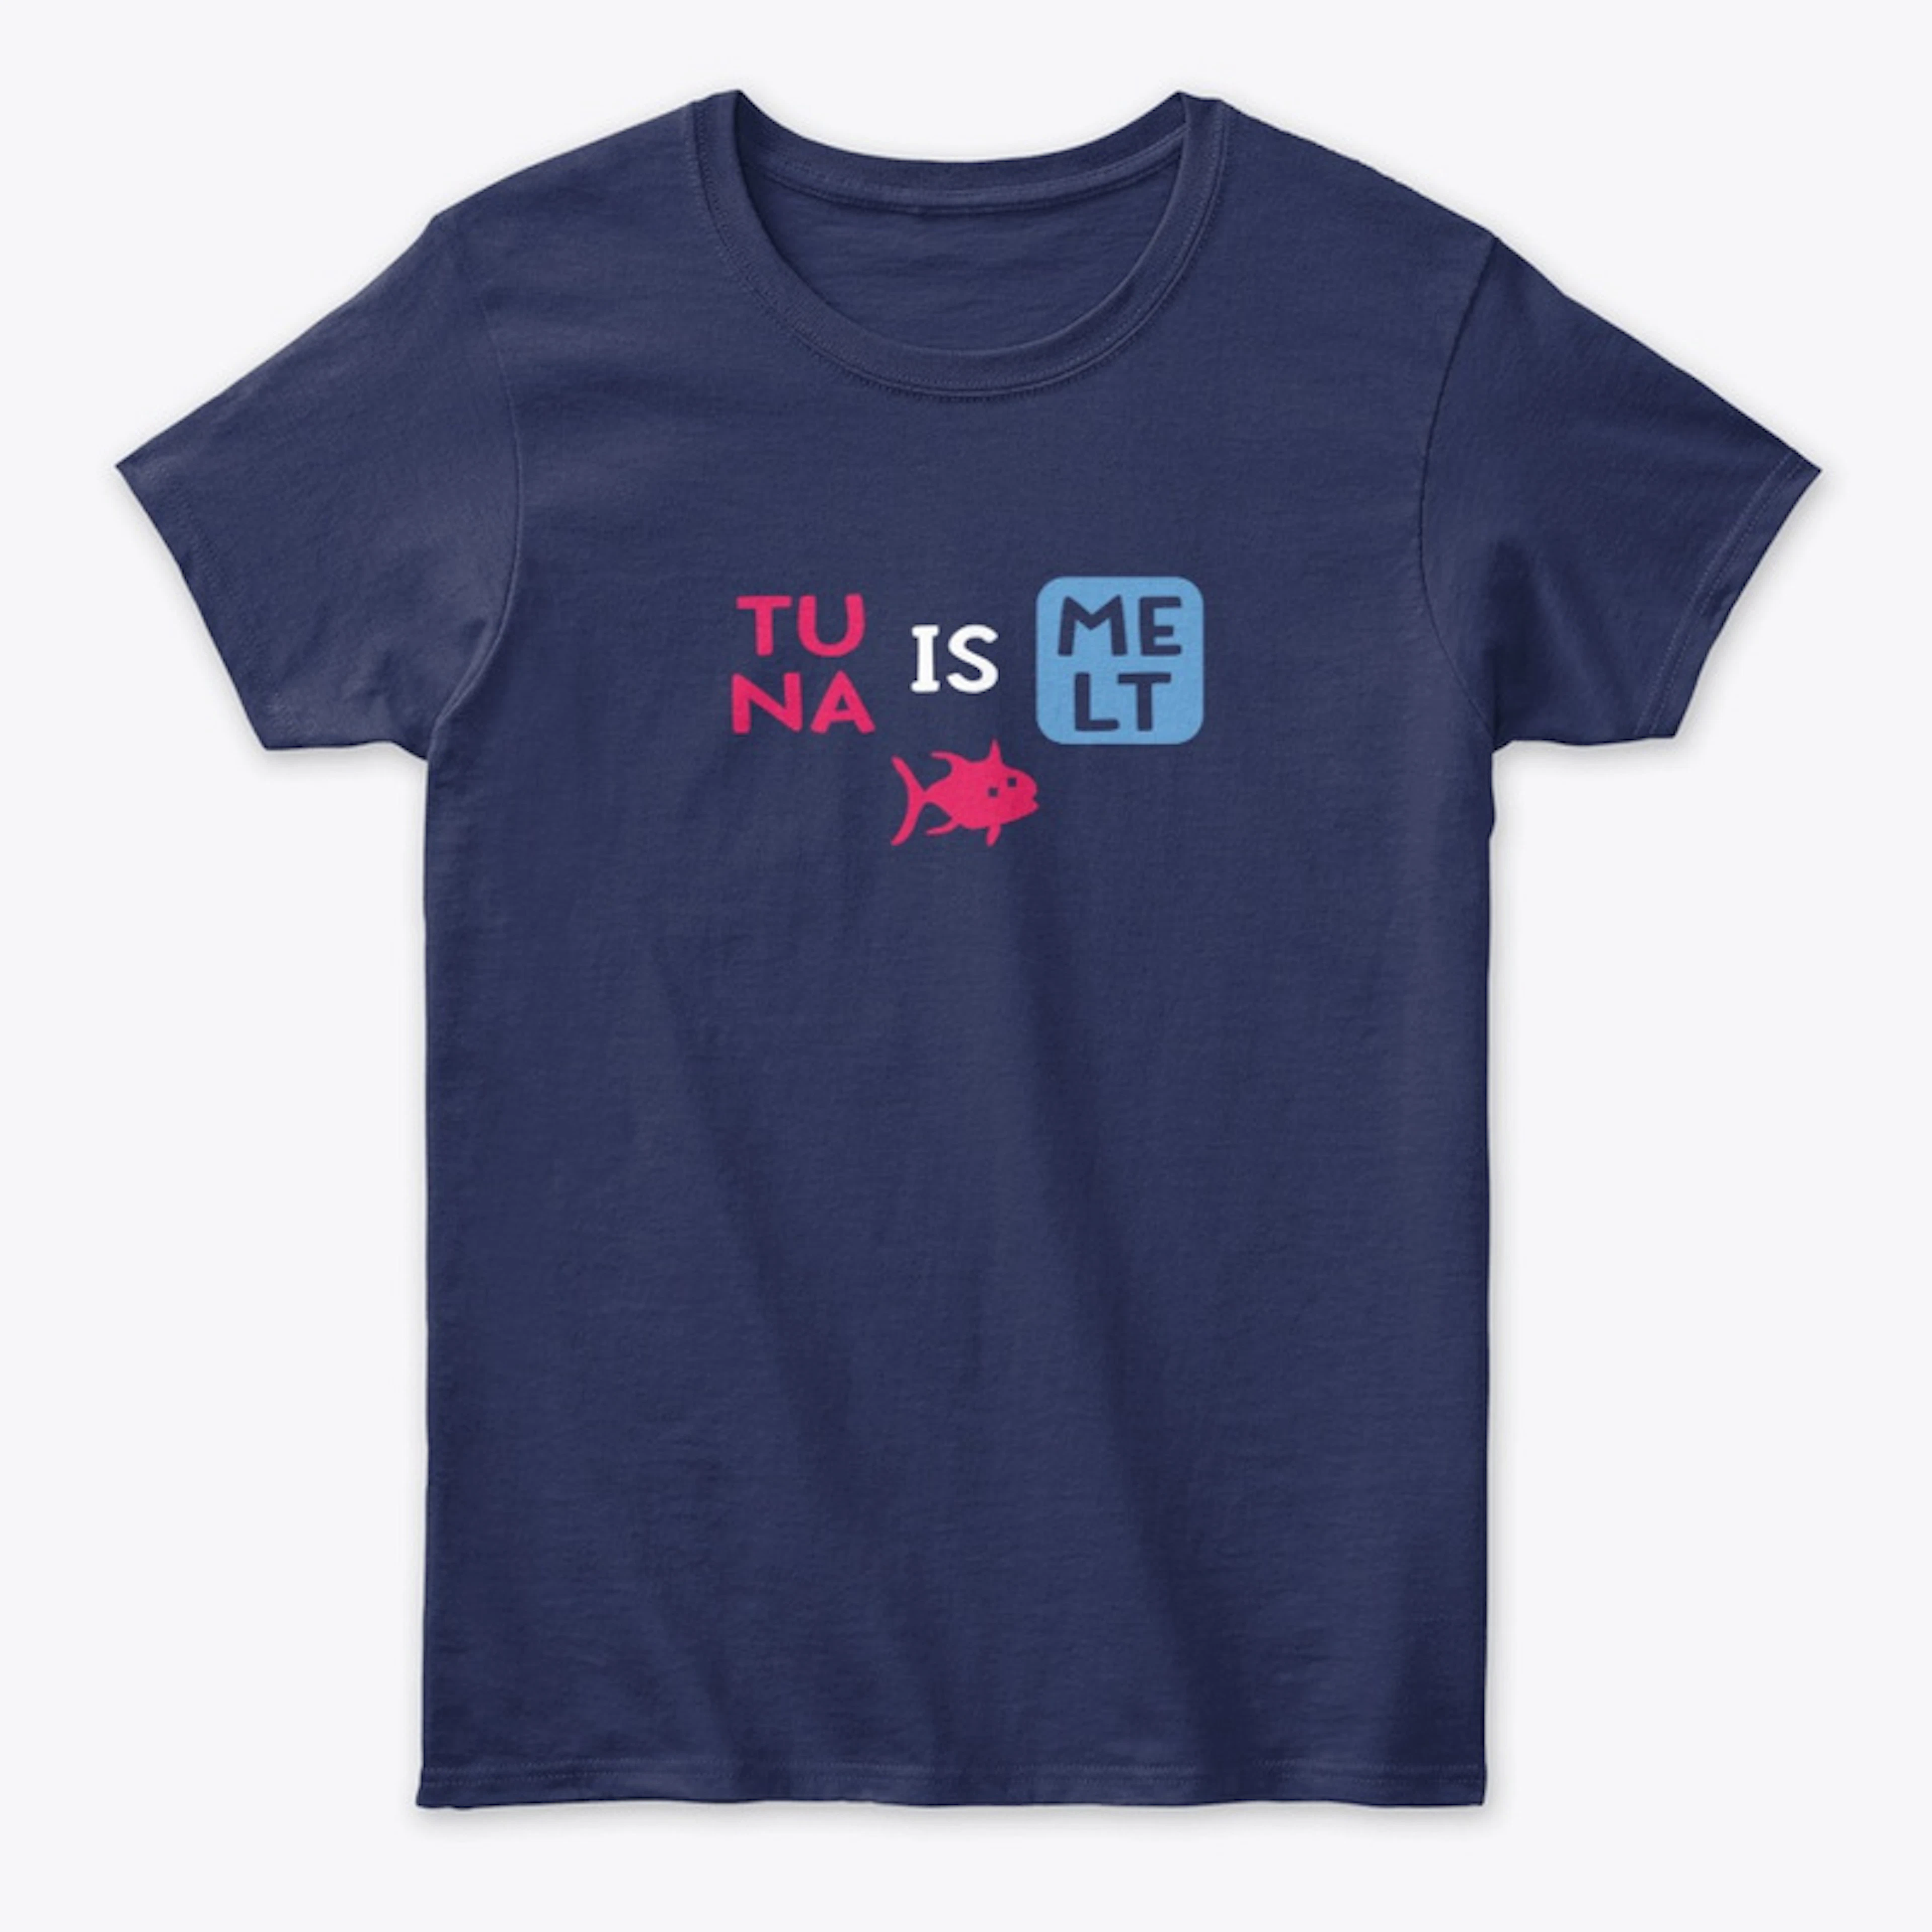 Tuna is Melt Puzzle Game Shirt